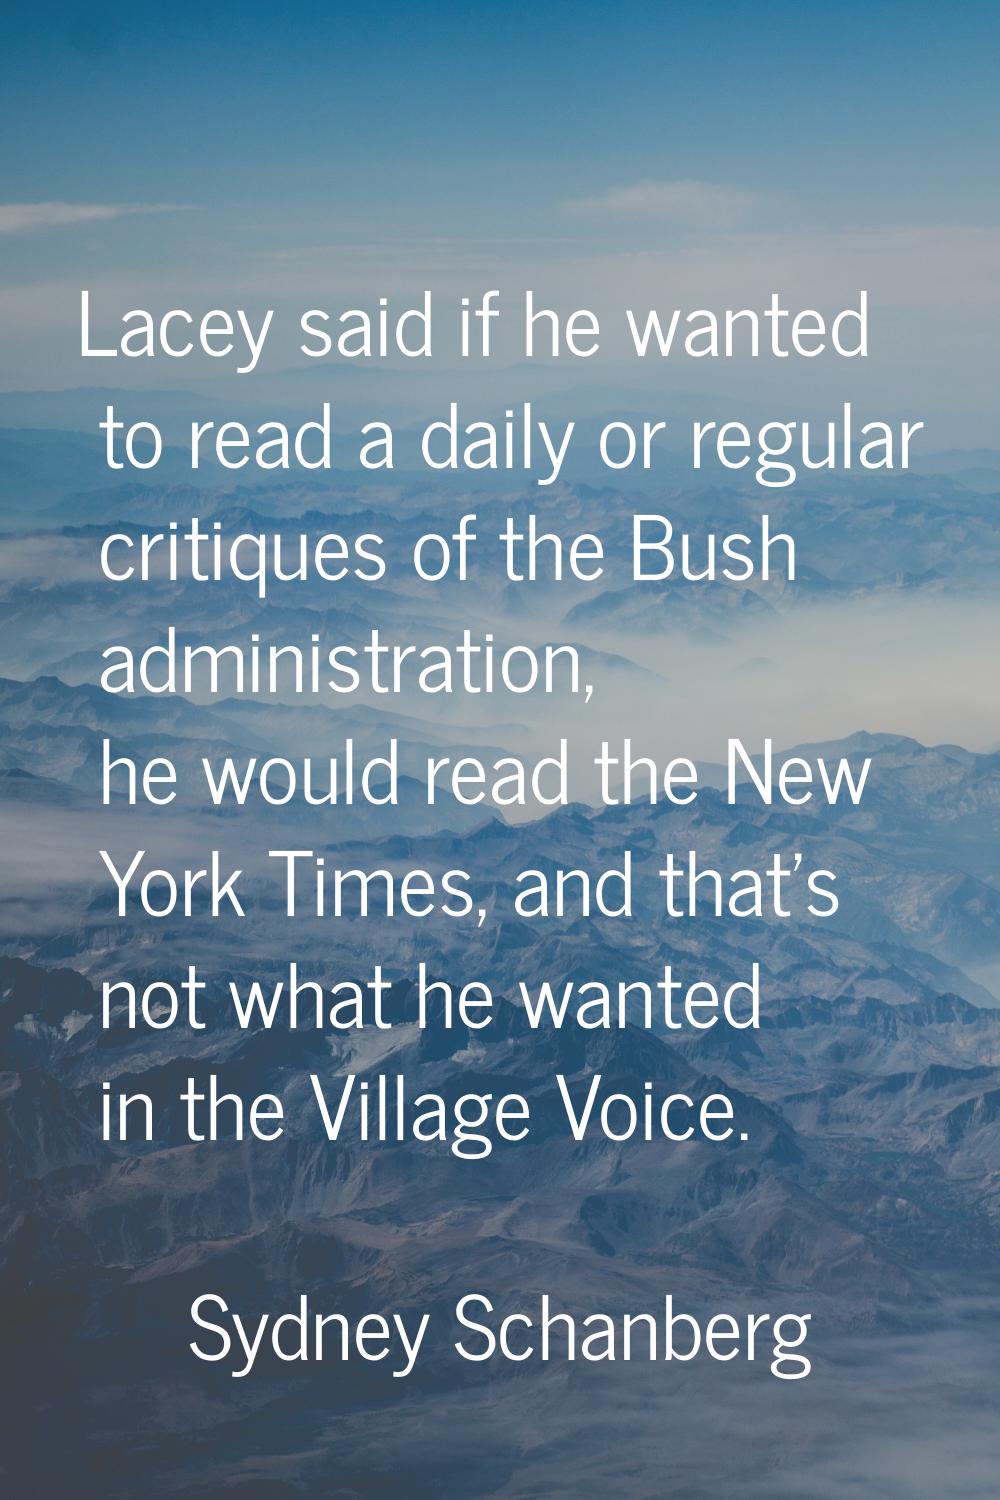 Lacey said if he wanted to read a daily or regular critiques of the Bush administration, he would r